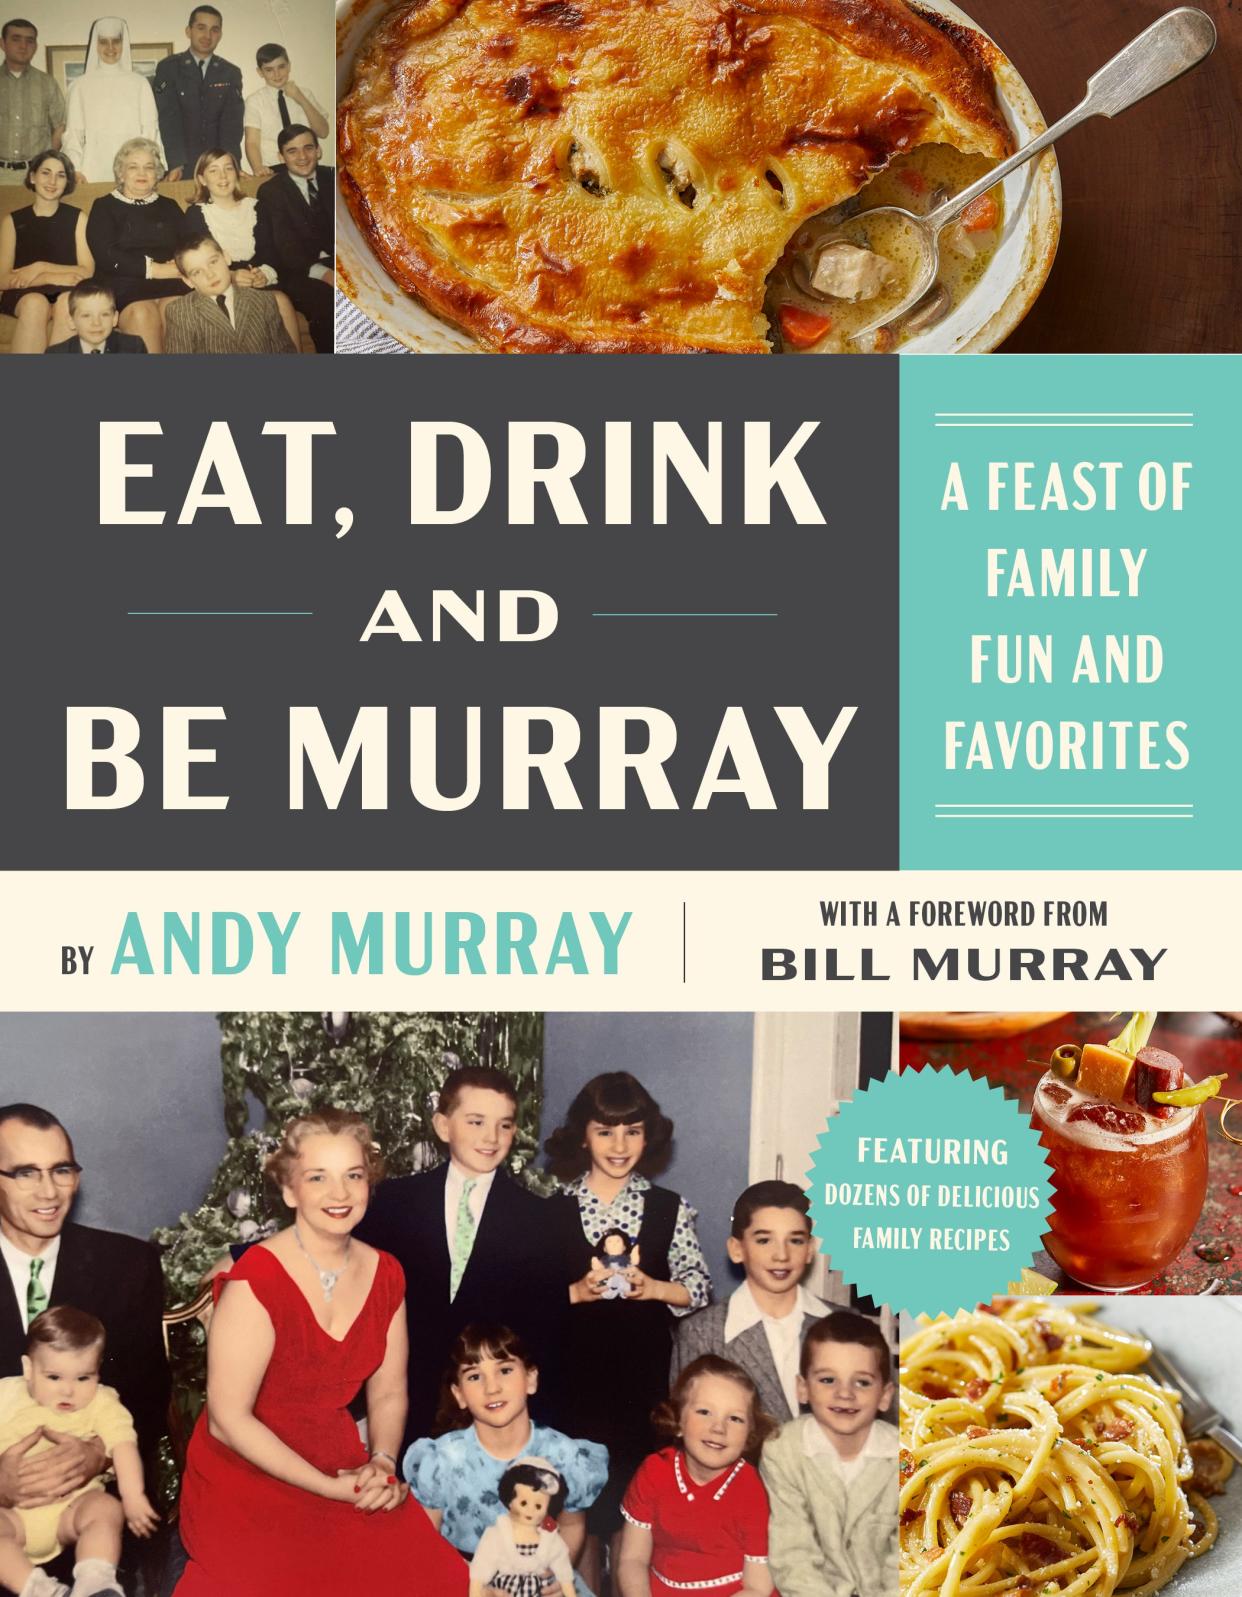 Andy Murray's cookbook, “Eat, Drink and be Murray: A Feast of Family Fun and Favorites.”